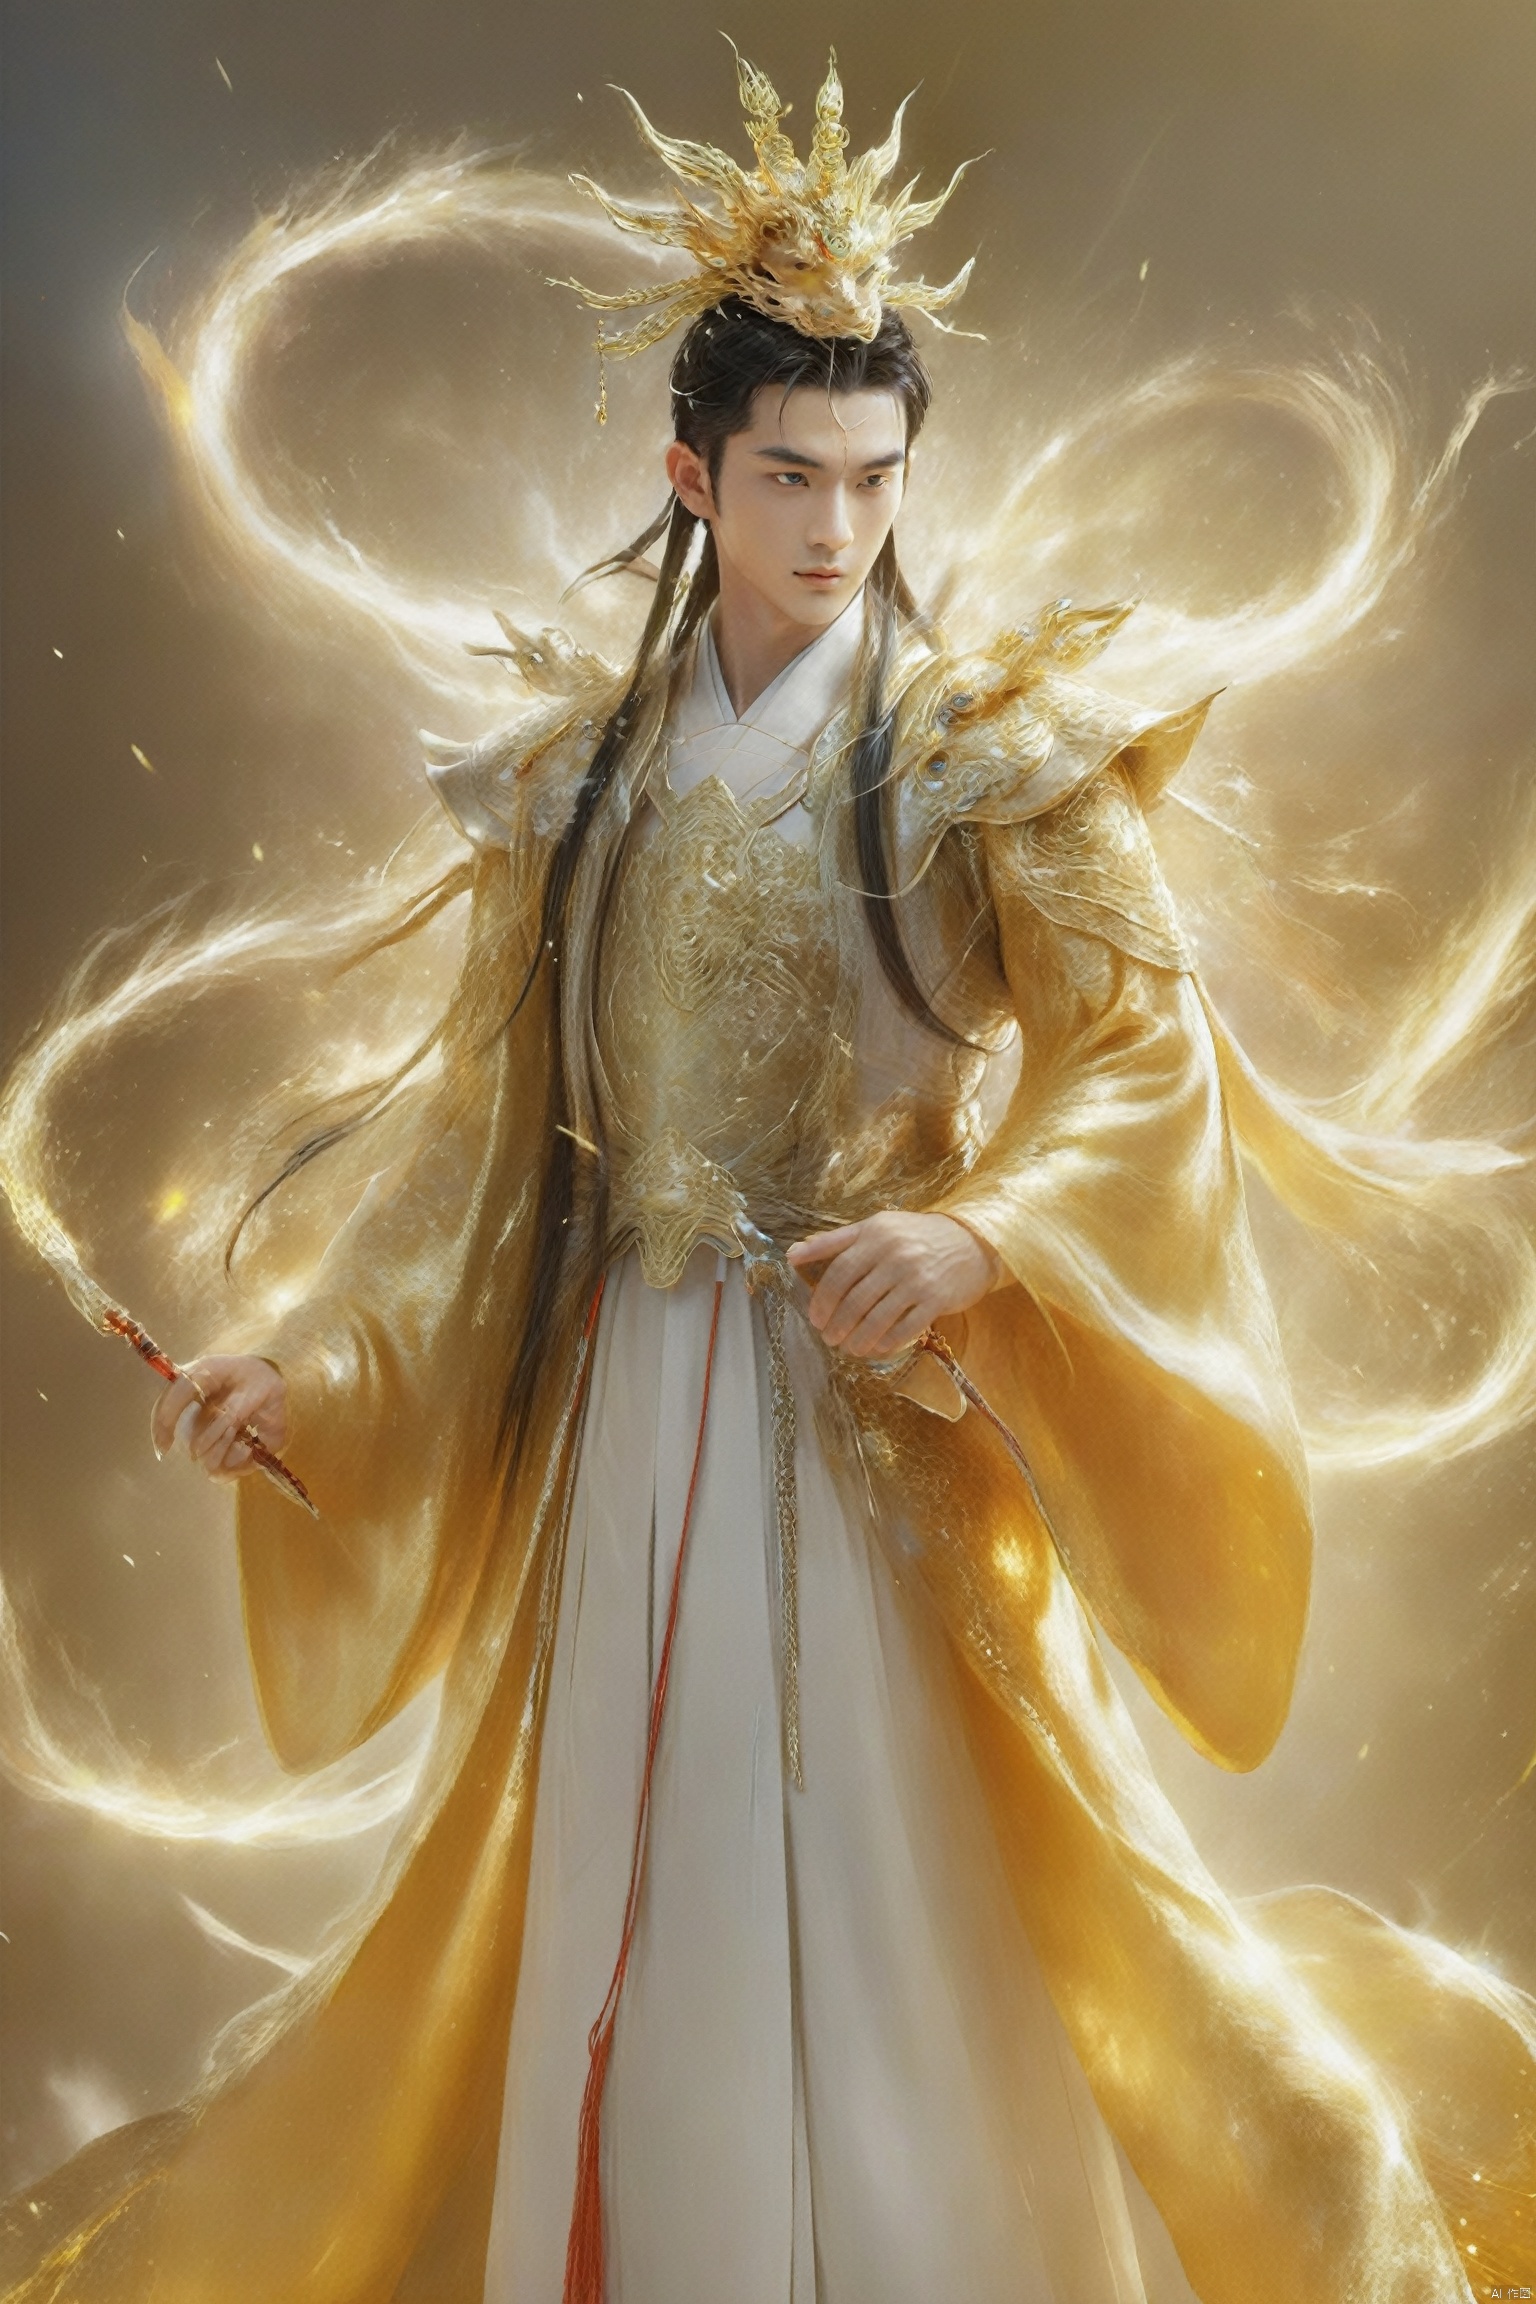  Eternal Dragon Emperor, the jewel on his crown is dazzling and dazzling, with delicate features, two bright and lively eyes, and a golden radiance emanating from his entire body,He holds the Seven Foot Heavenly Sword in his hand……, Oouguancong